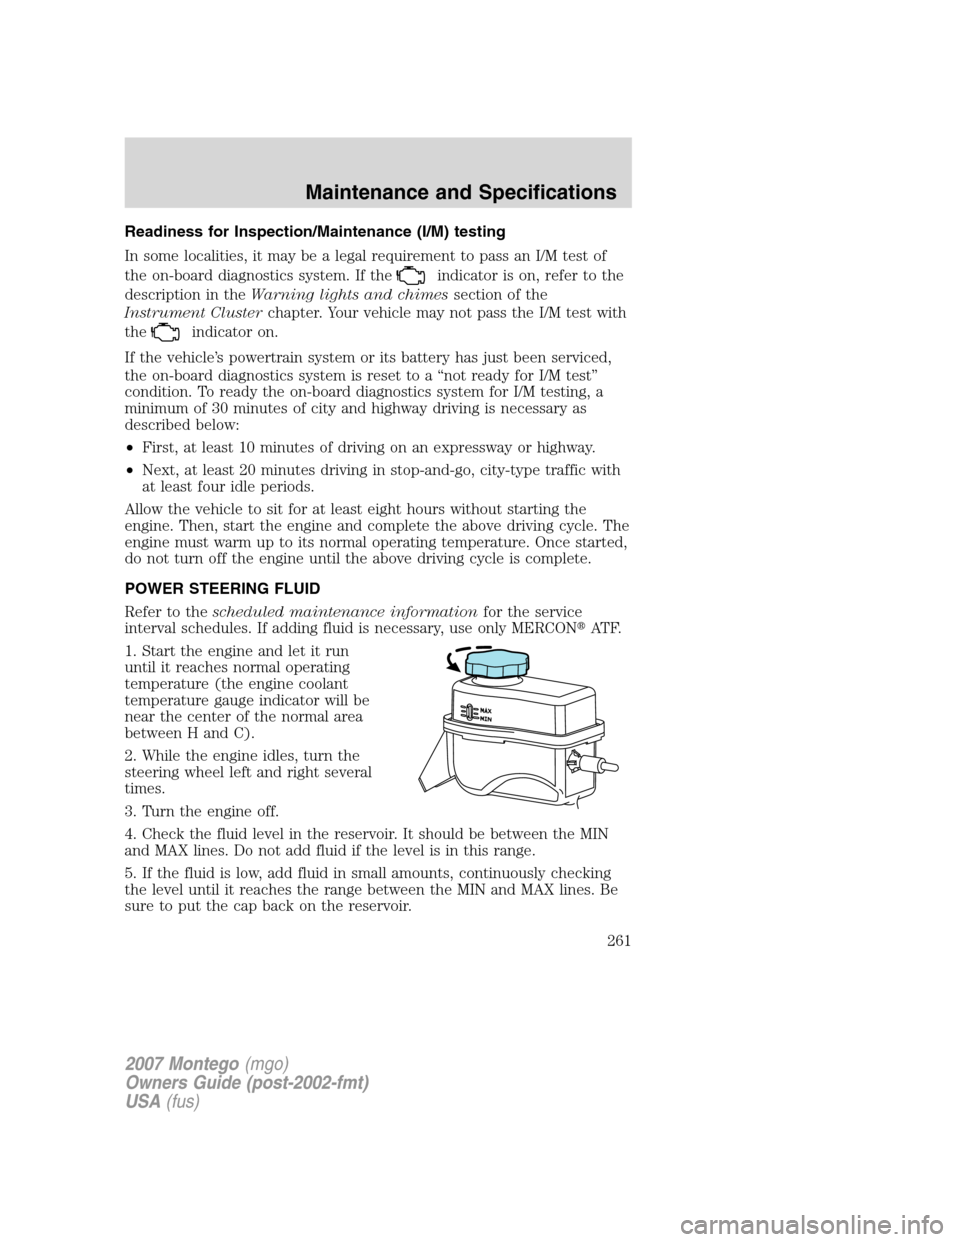 Mercury Montego 2007  Owners Manuals Readiness for Inspection/Maintenance (I/M) testing
In some localities, it may be a legal requirement to pass an I/M test of
the on-board diagnostics system. If the
indicator is on, refer to the
descri